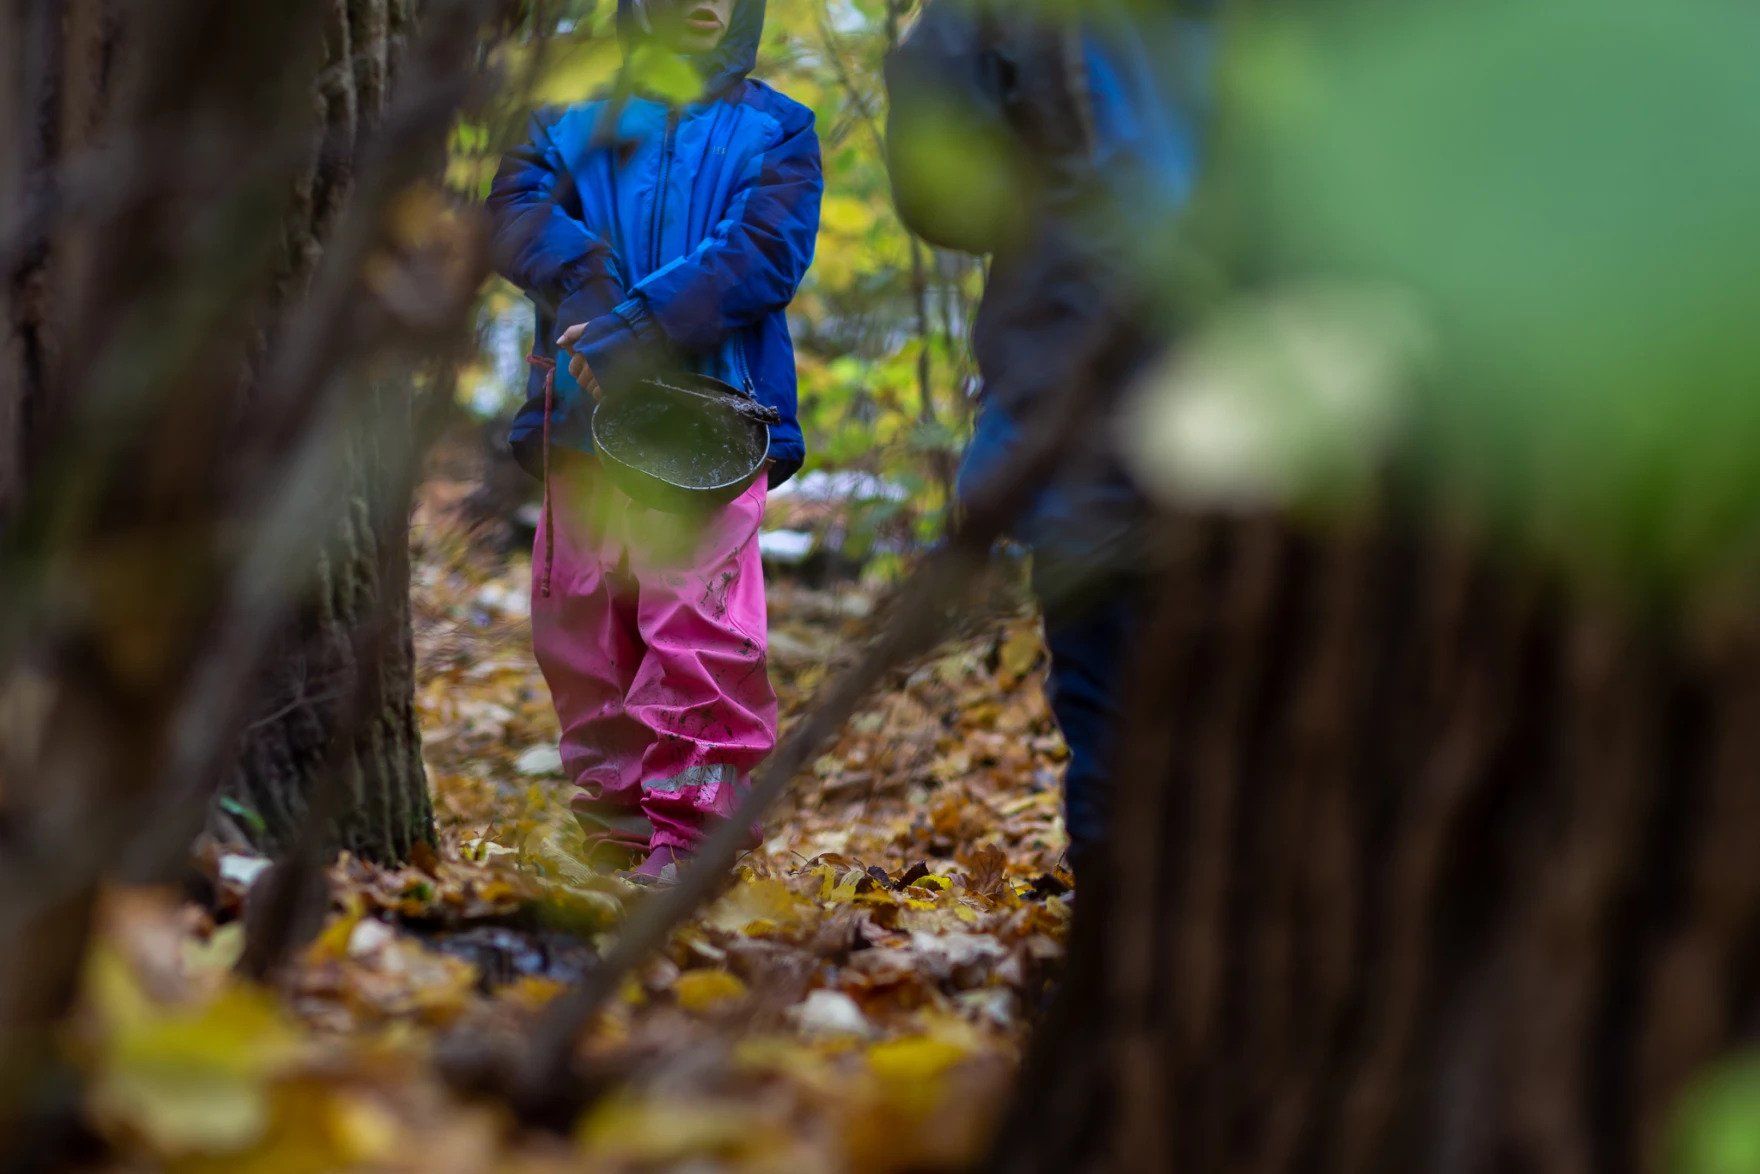 Parents and educators say layers and lots of warm clothes — and rain pants — are the key to enjoying a nature-based learning experience. Image by Ryan Delaney. Germany, 2020.